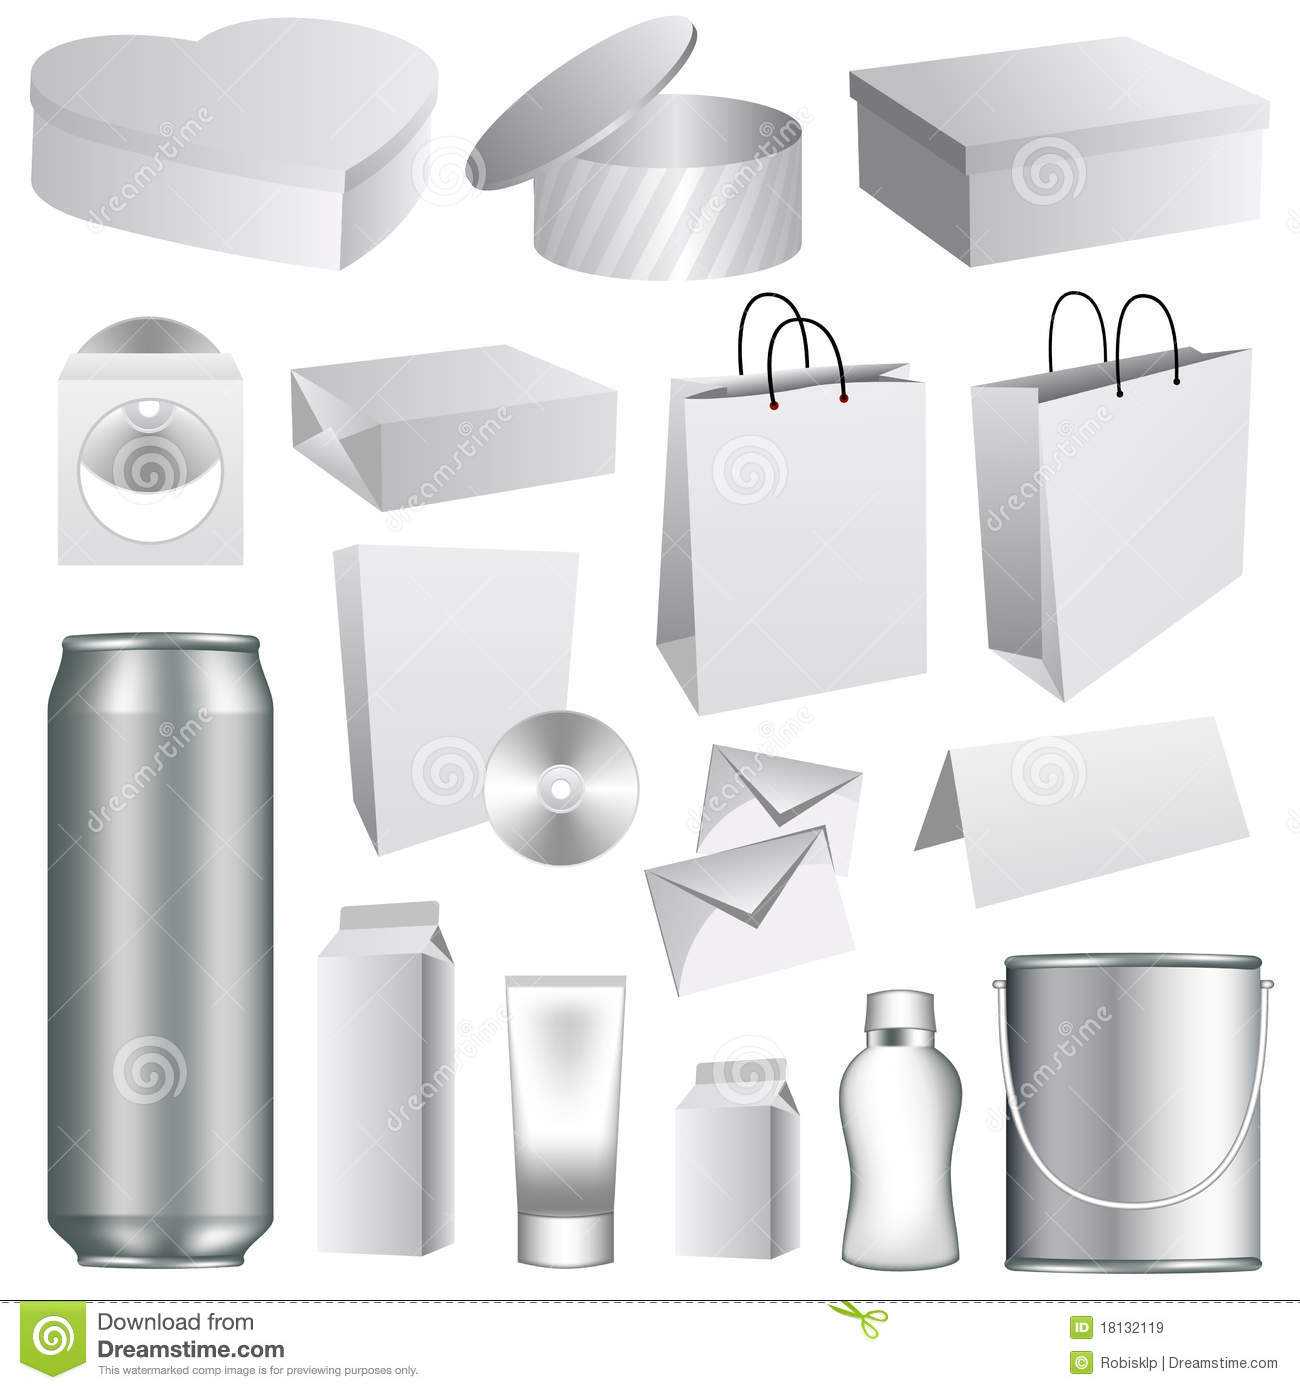 Blank Packaging Templates Stock Vector. Illustration Of With Regard To Blank Packaging Templates